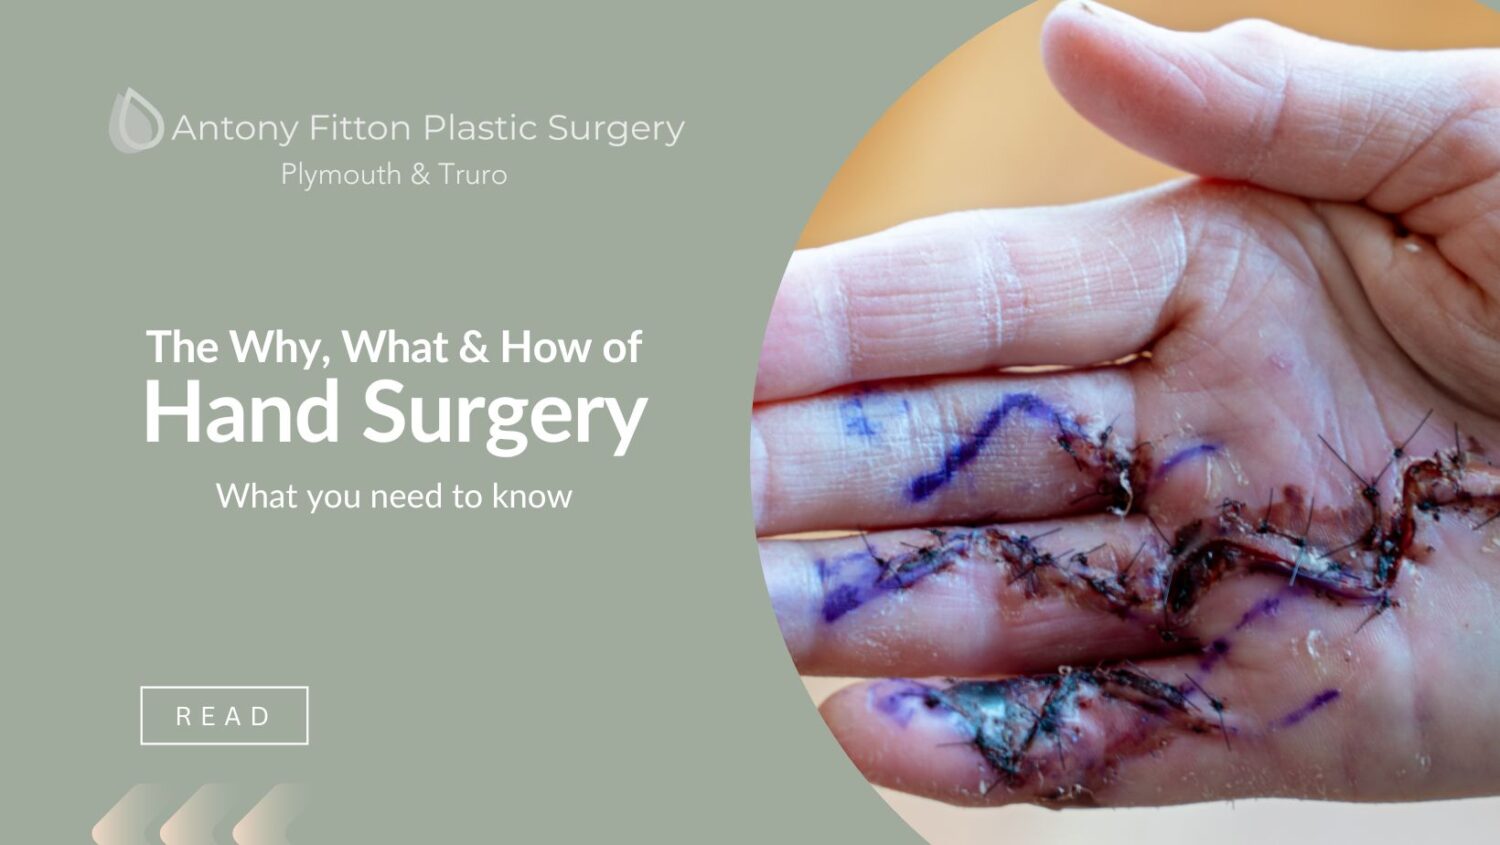 The Why, What & How of Hand Surgery